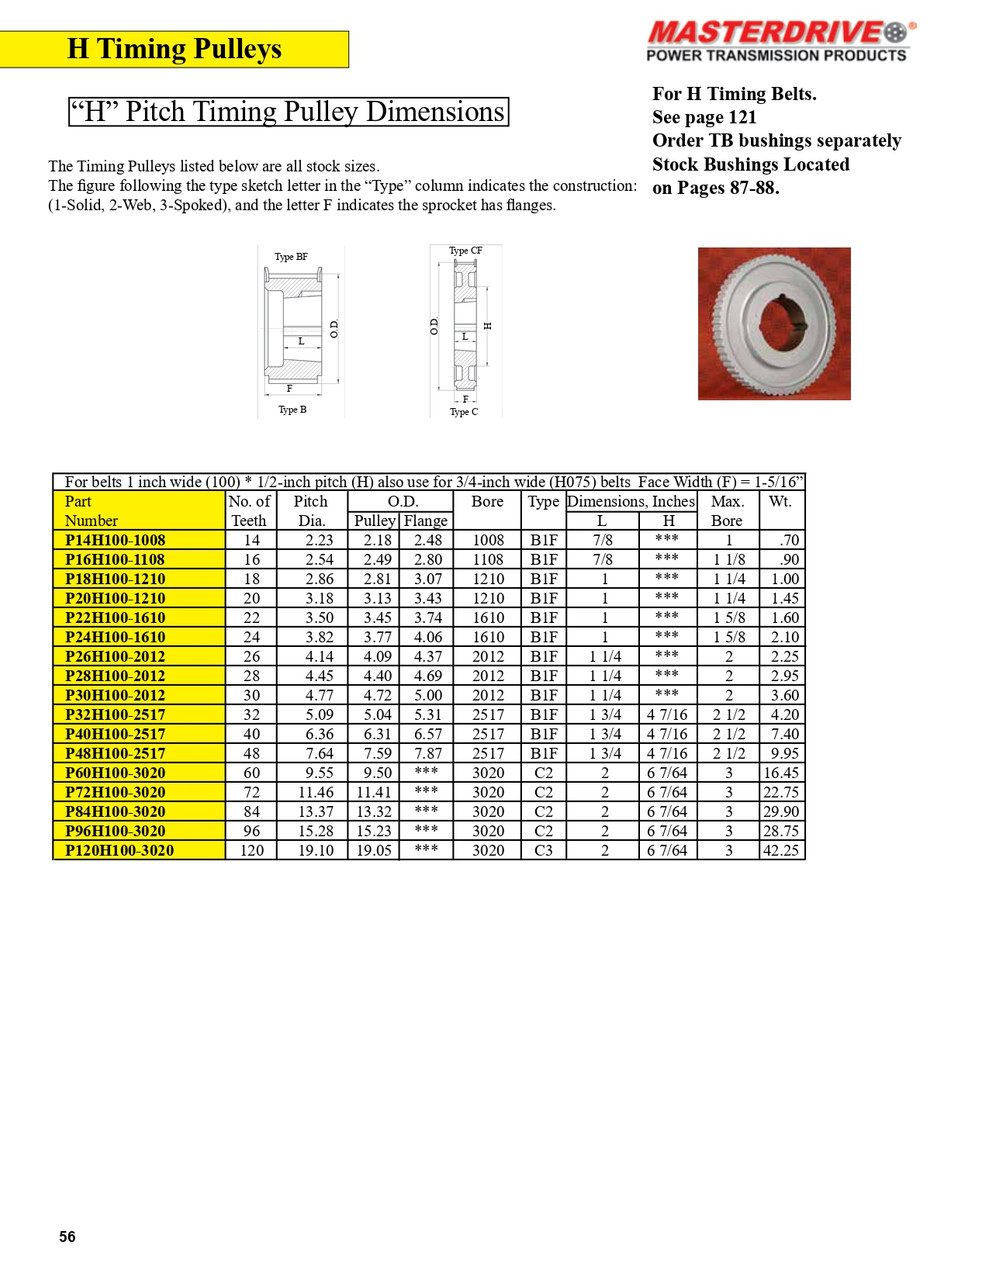 30 Tooth "H" Pitch "TB" Timing Pulley  P30H100-2012